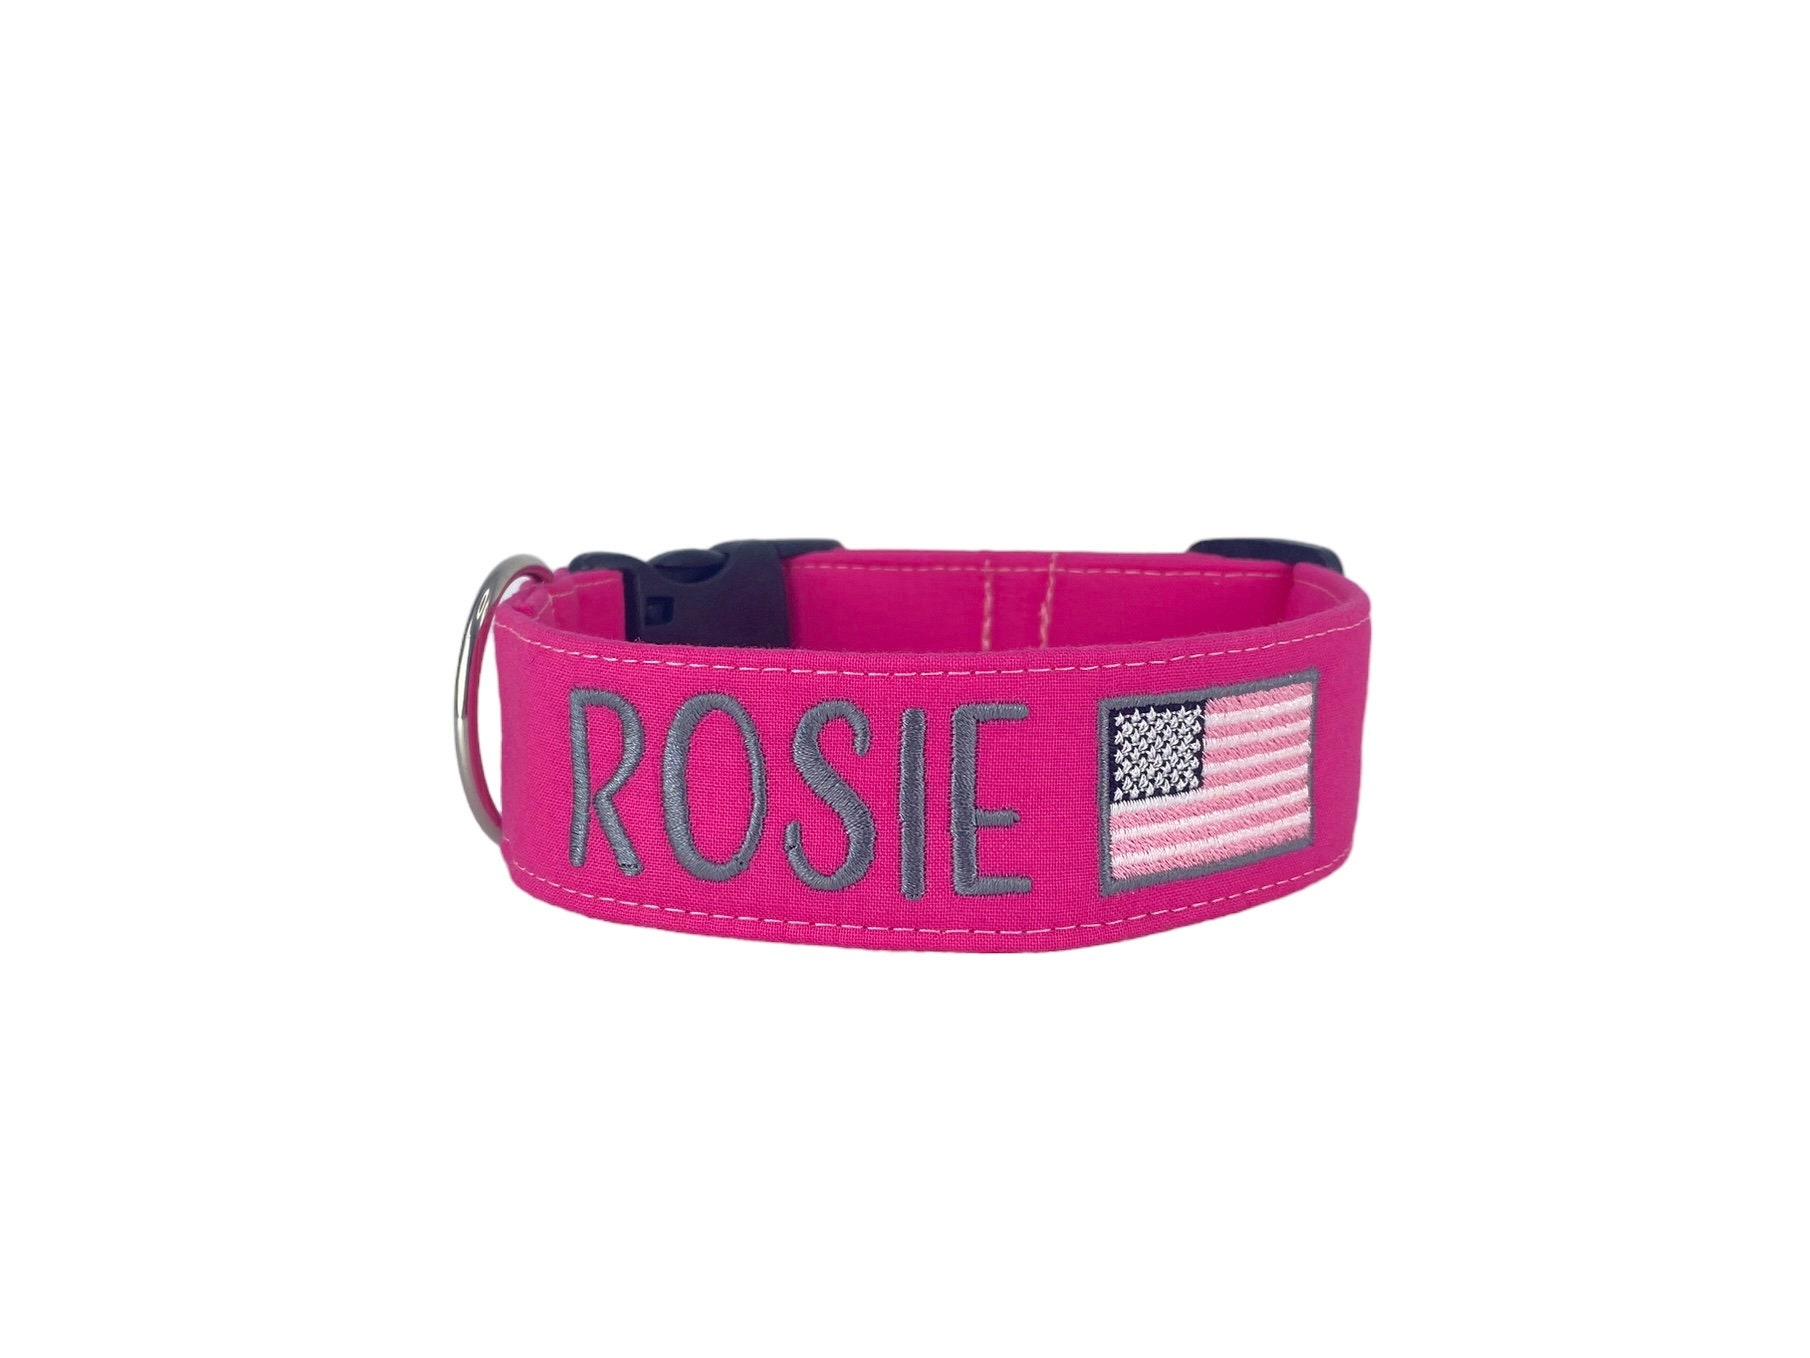 Source Personalized designer male boy dog collars for small medium